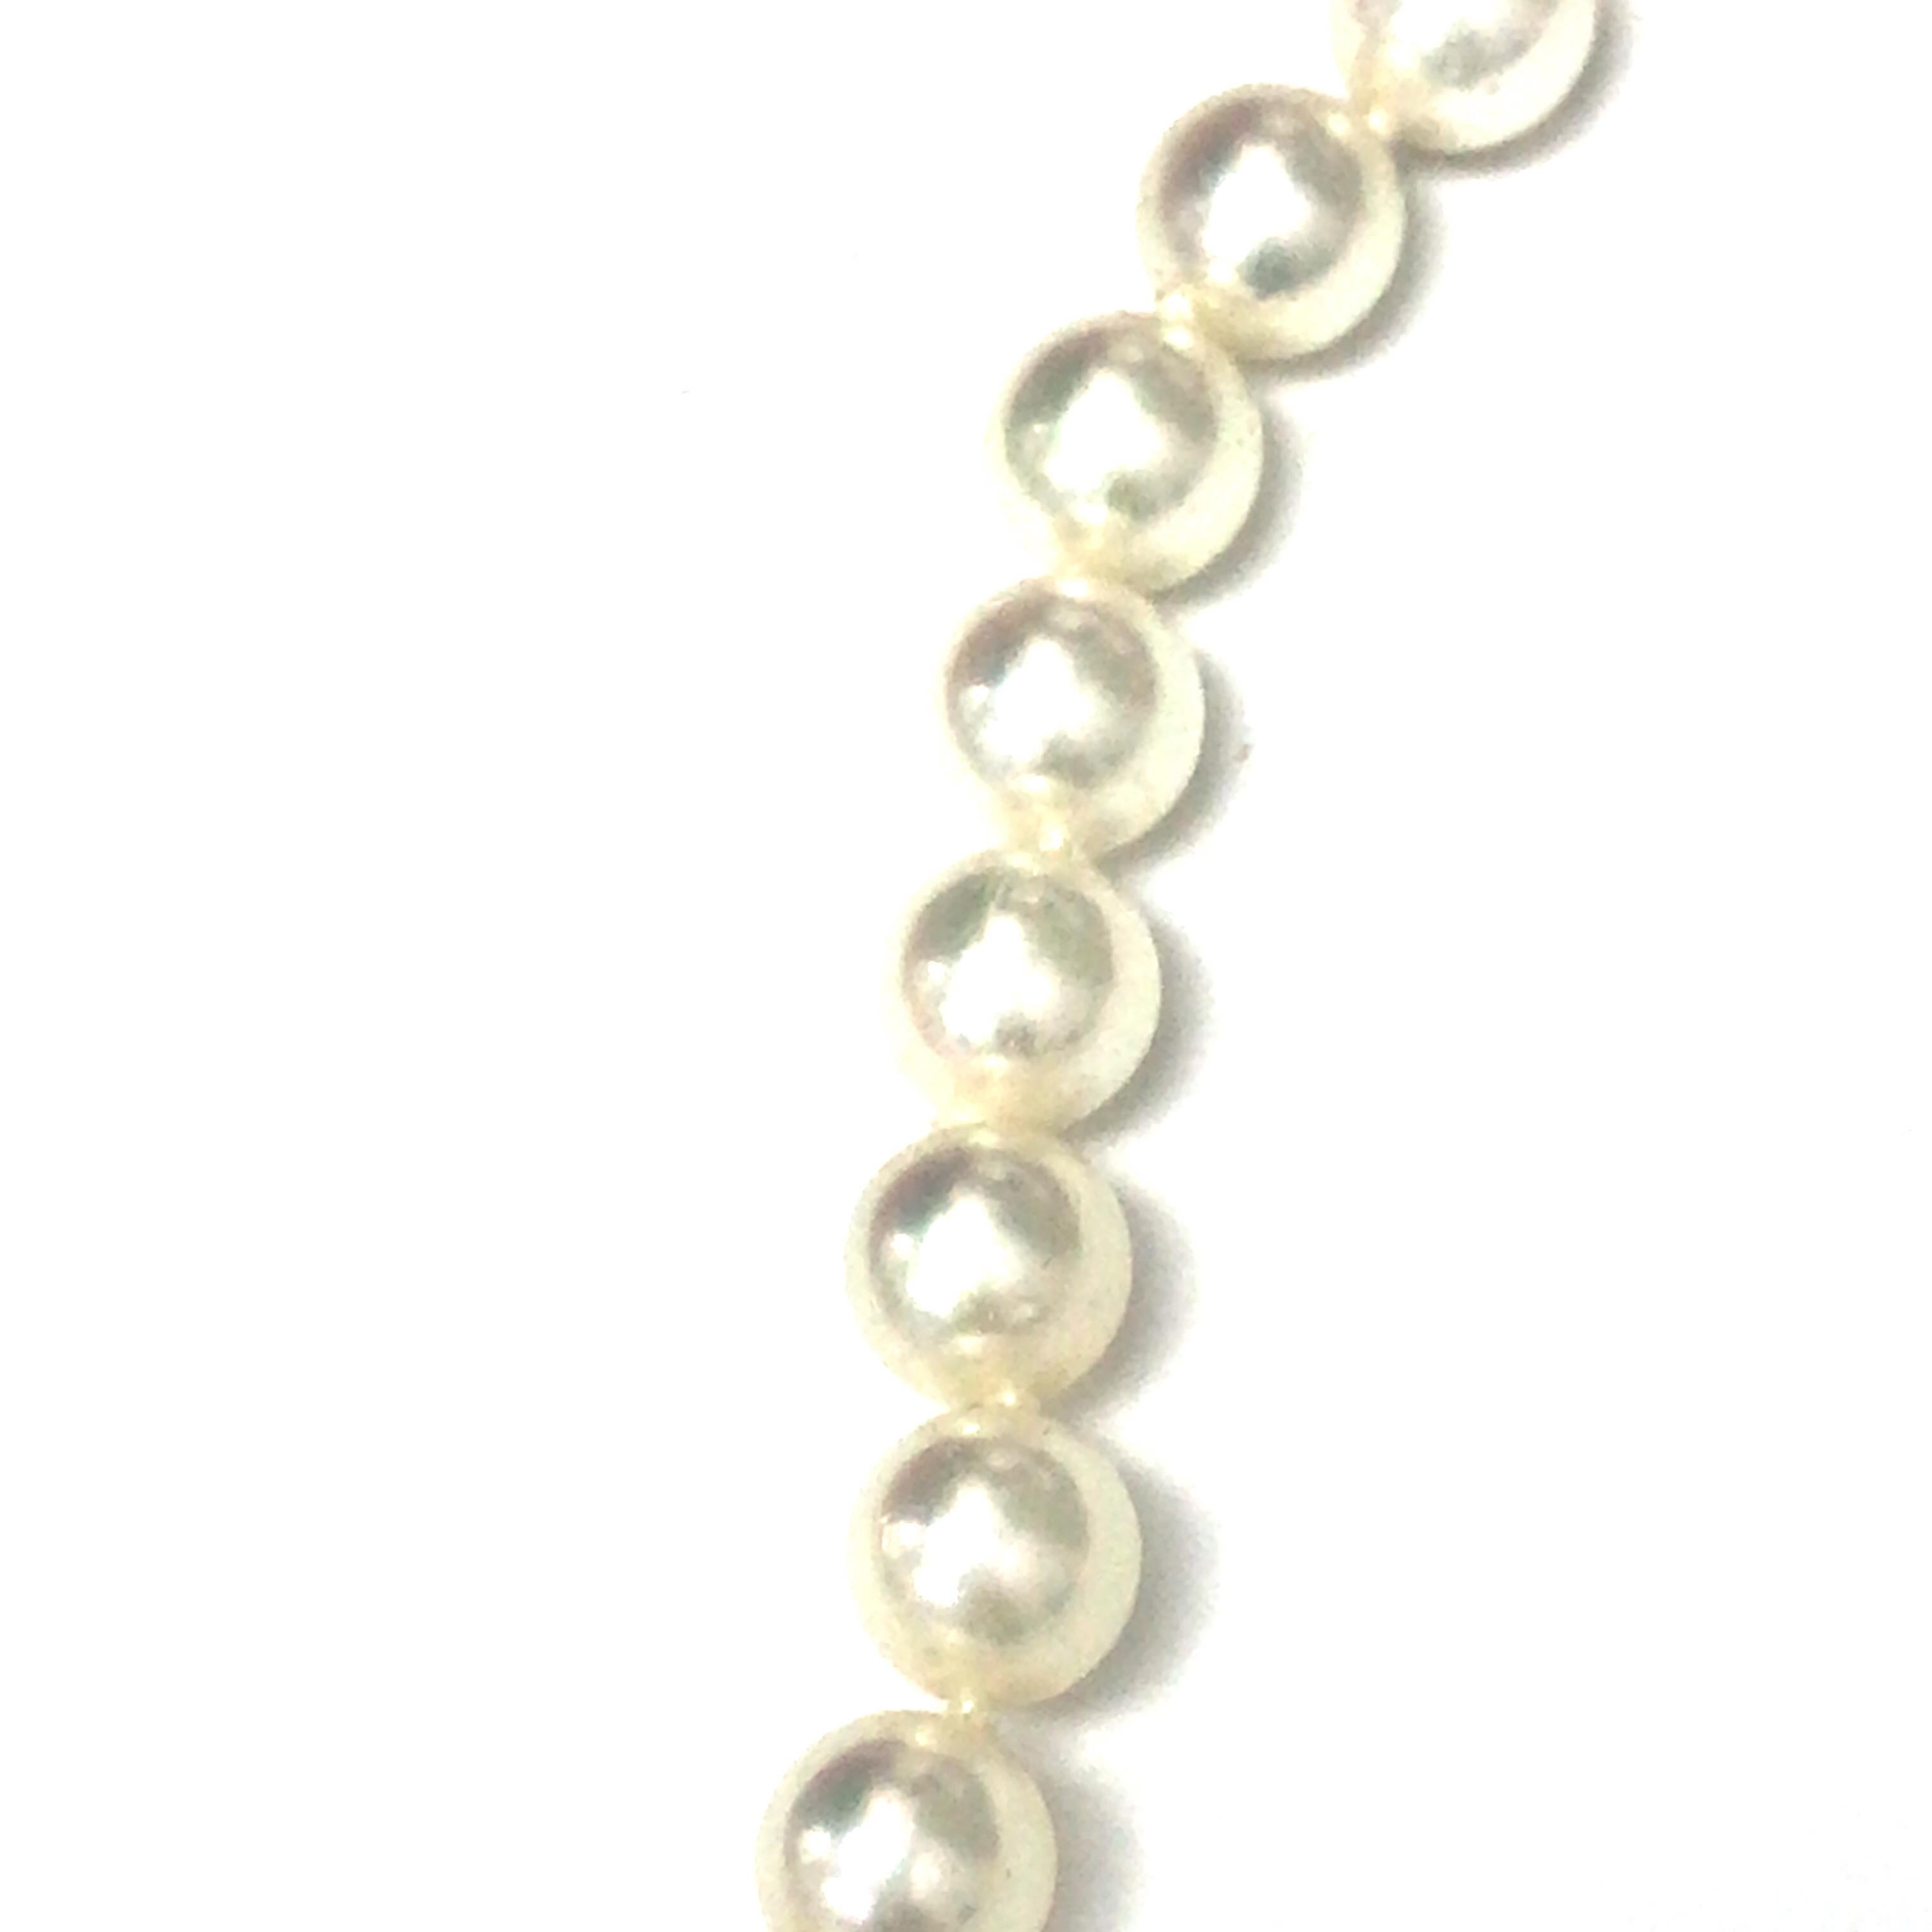 Mikimoto Pearl Strand 18K Yellow Gold Bow Clasp.  Stamped 750 MI.  17 1/2 inch in length.